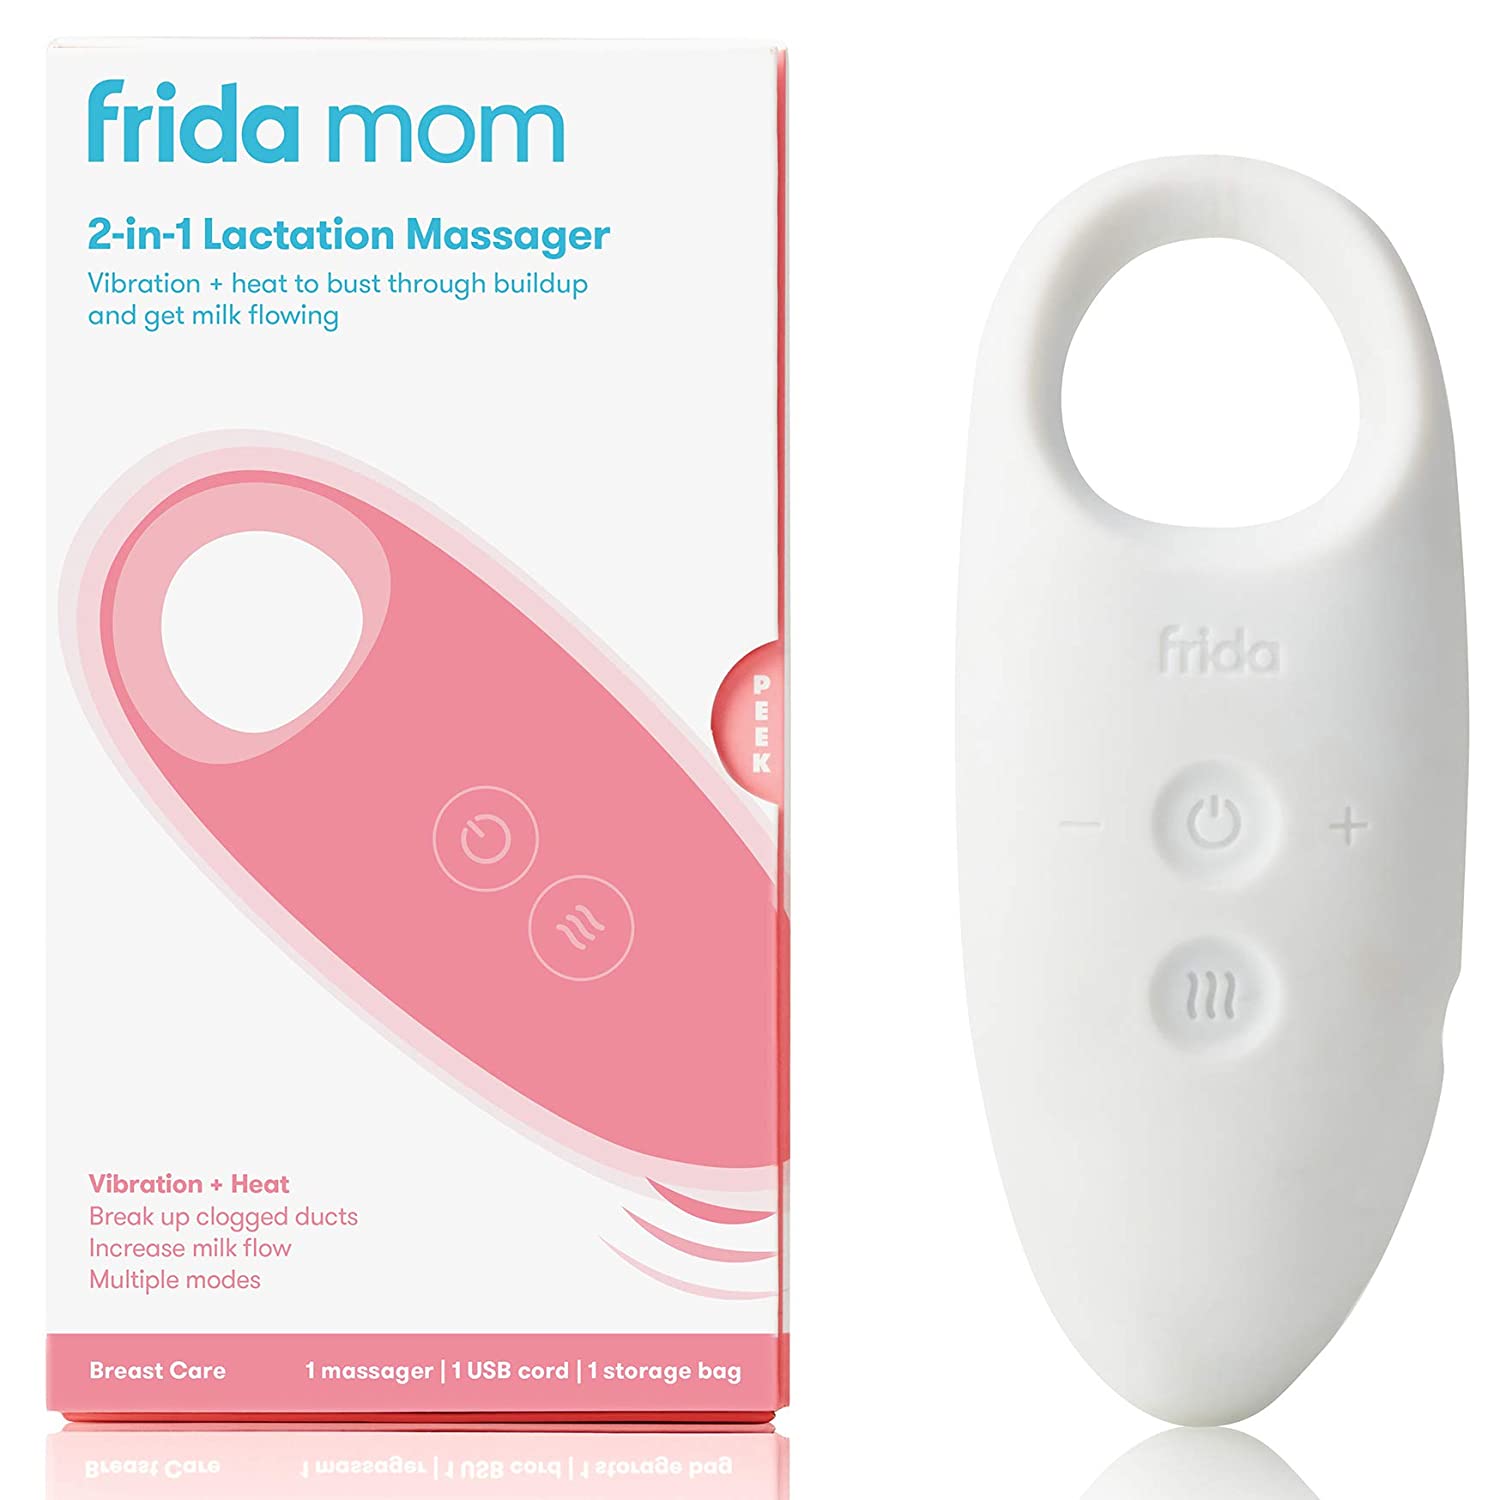 2 in 1 Lactation Massager